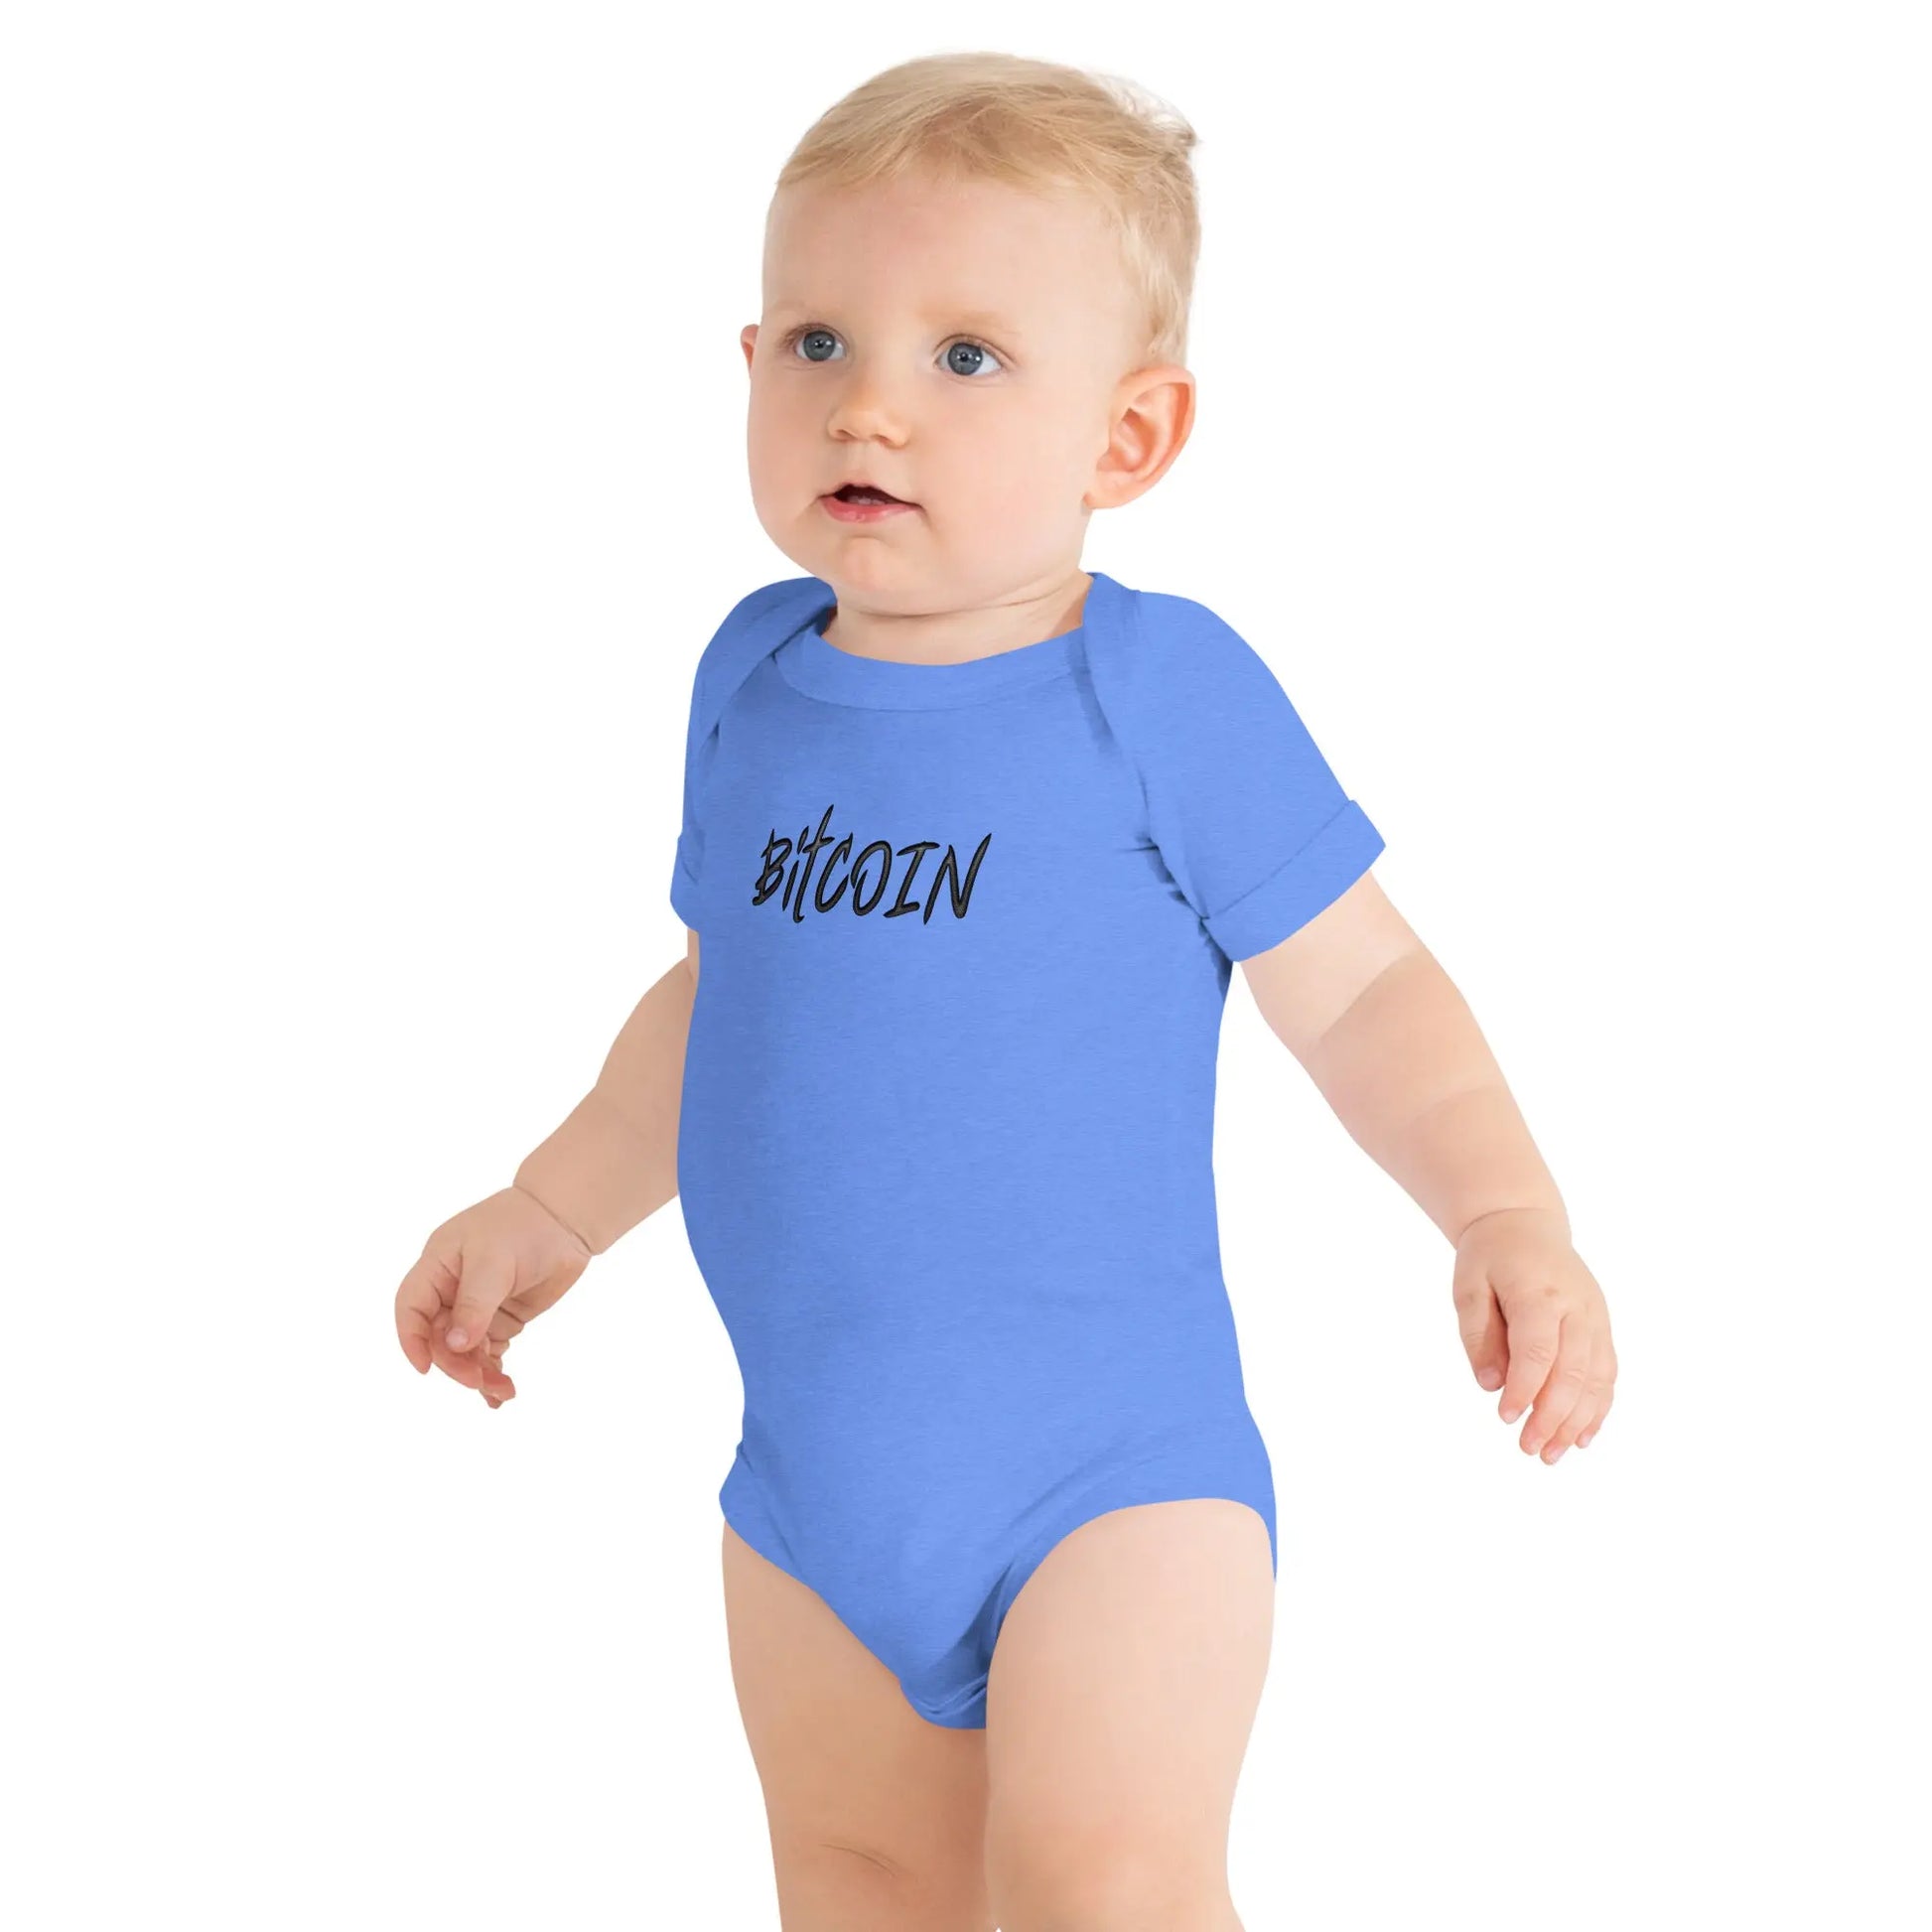 Fearless Bitcoin - Baby Bitcoin Body Suit Blue Color